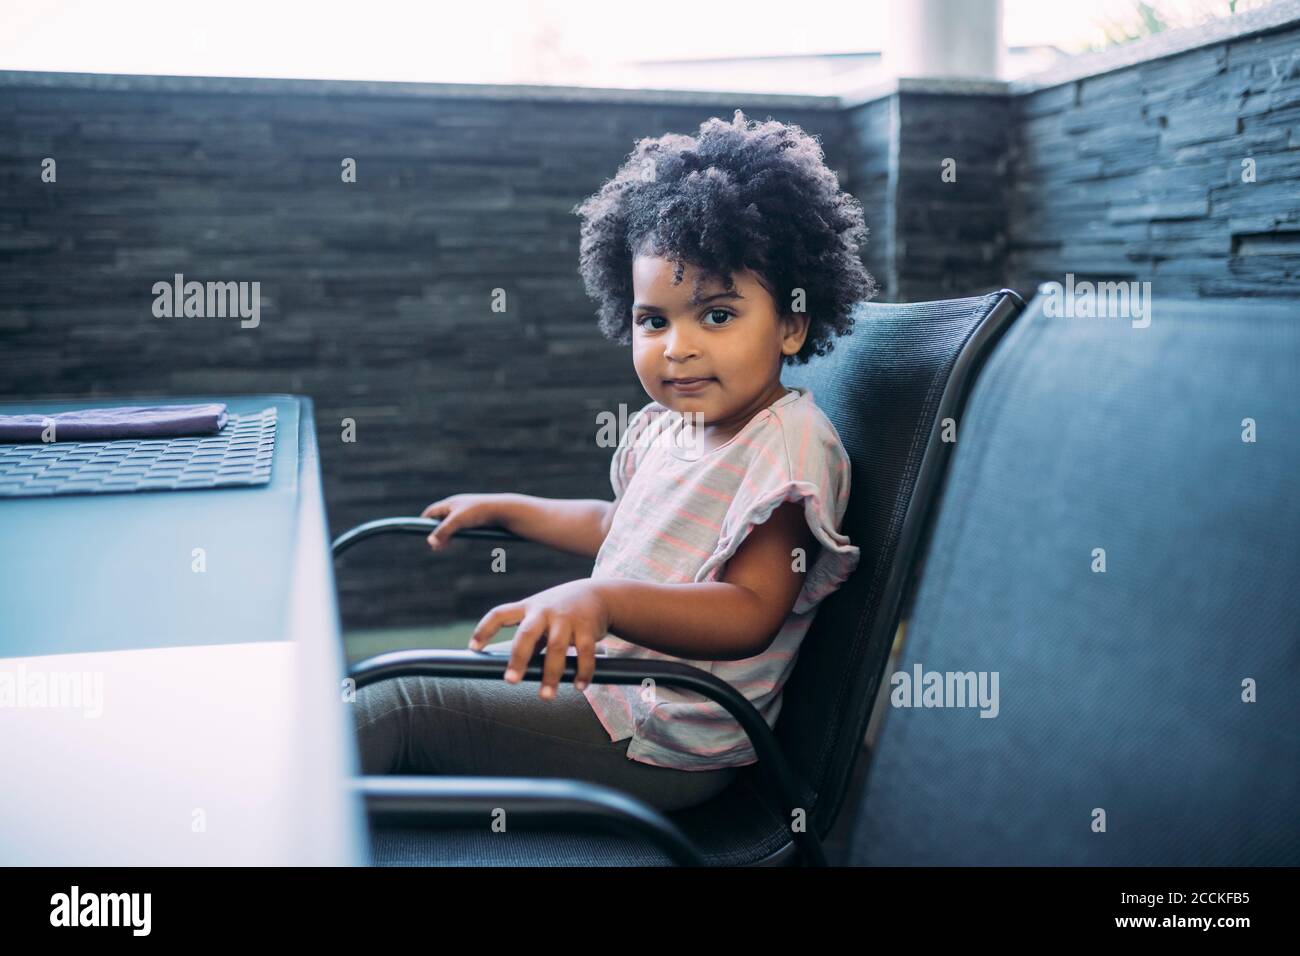 Cute baby girl with curly hair sitting on chair at home Stock Photo